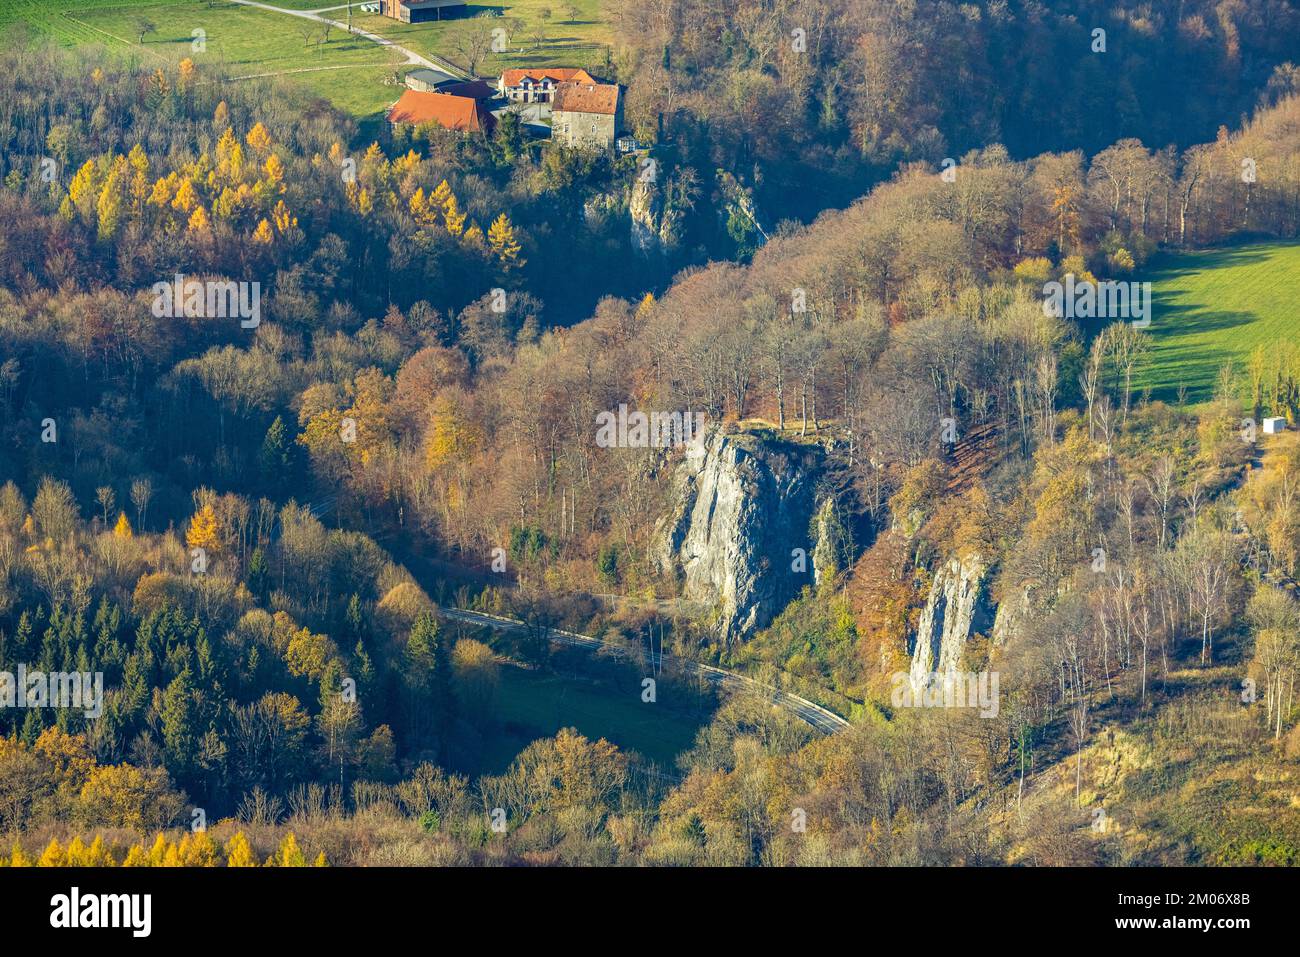 Aerial view, Reckenhöhle dripstone cave in autumnal forest in Volkringhausen district in Balve, Sauerland, North Rhine-Westphalia, Germany, Prize, DE, Stock Photo